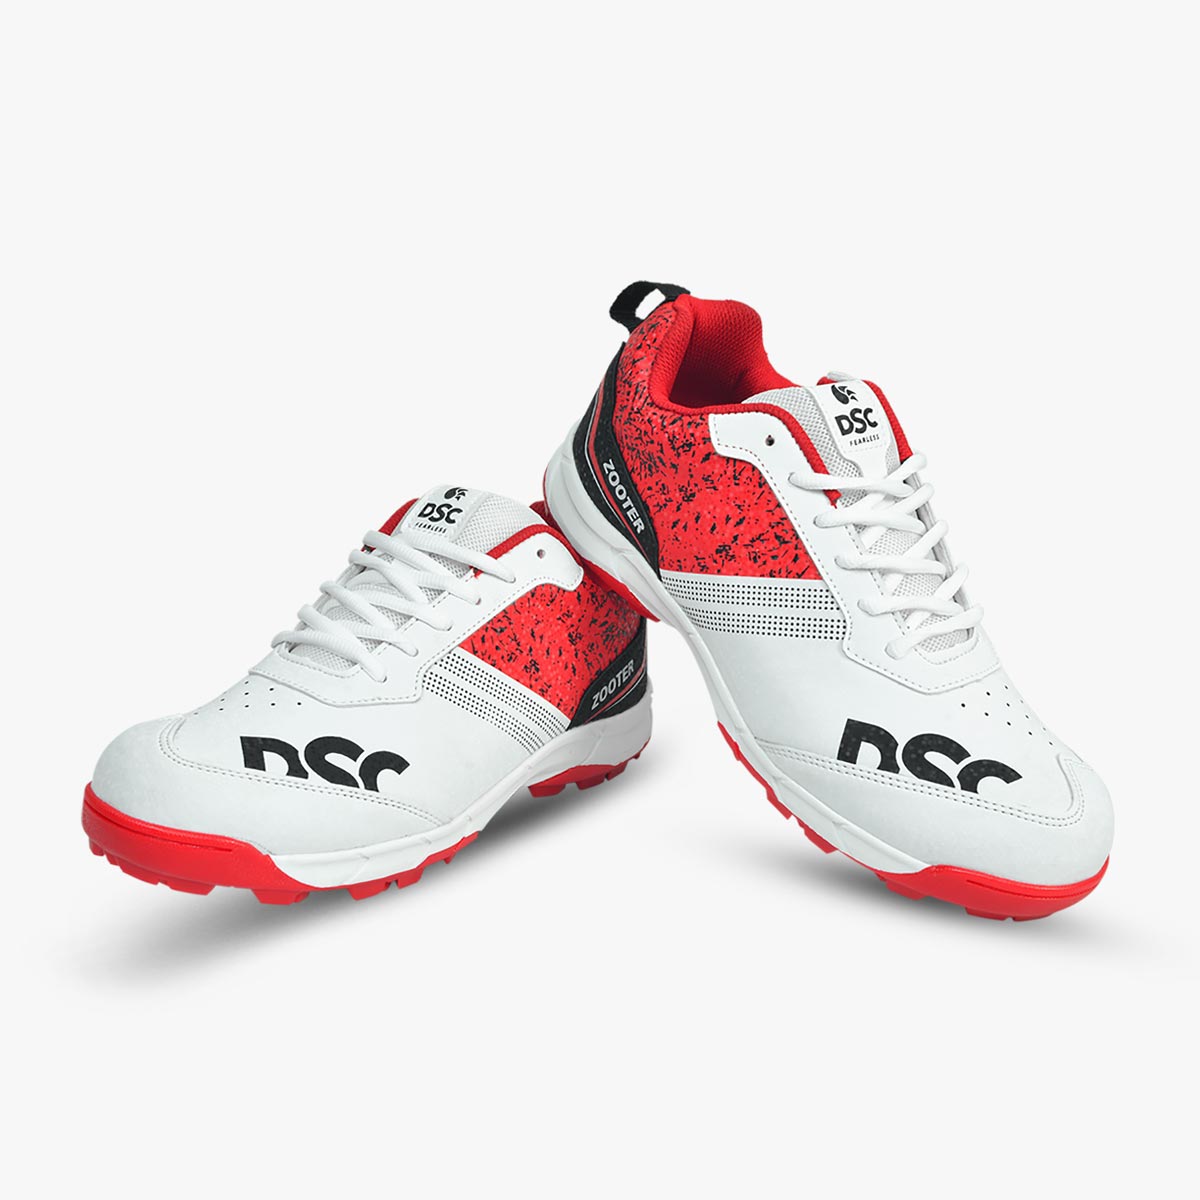 DSC Zooter Cricket Shoes – Red